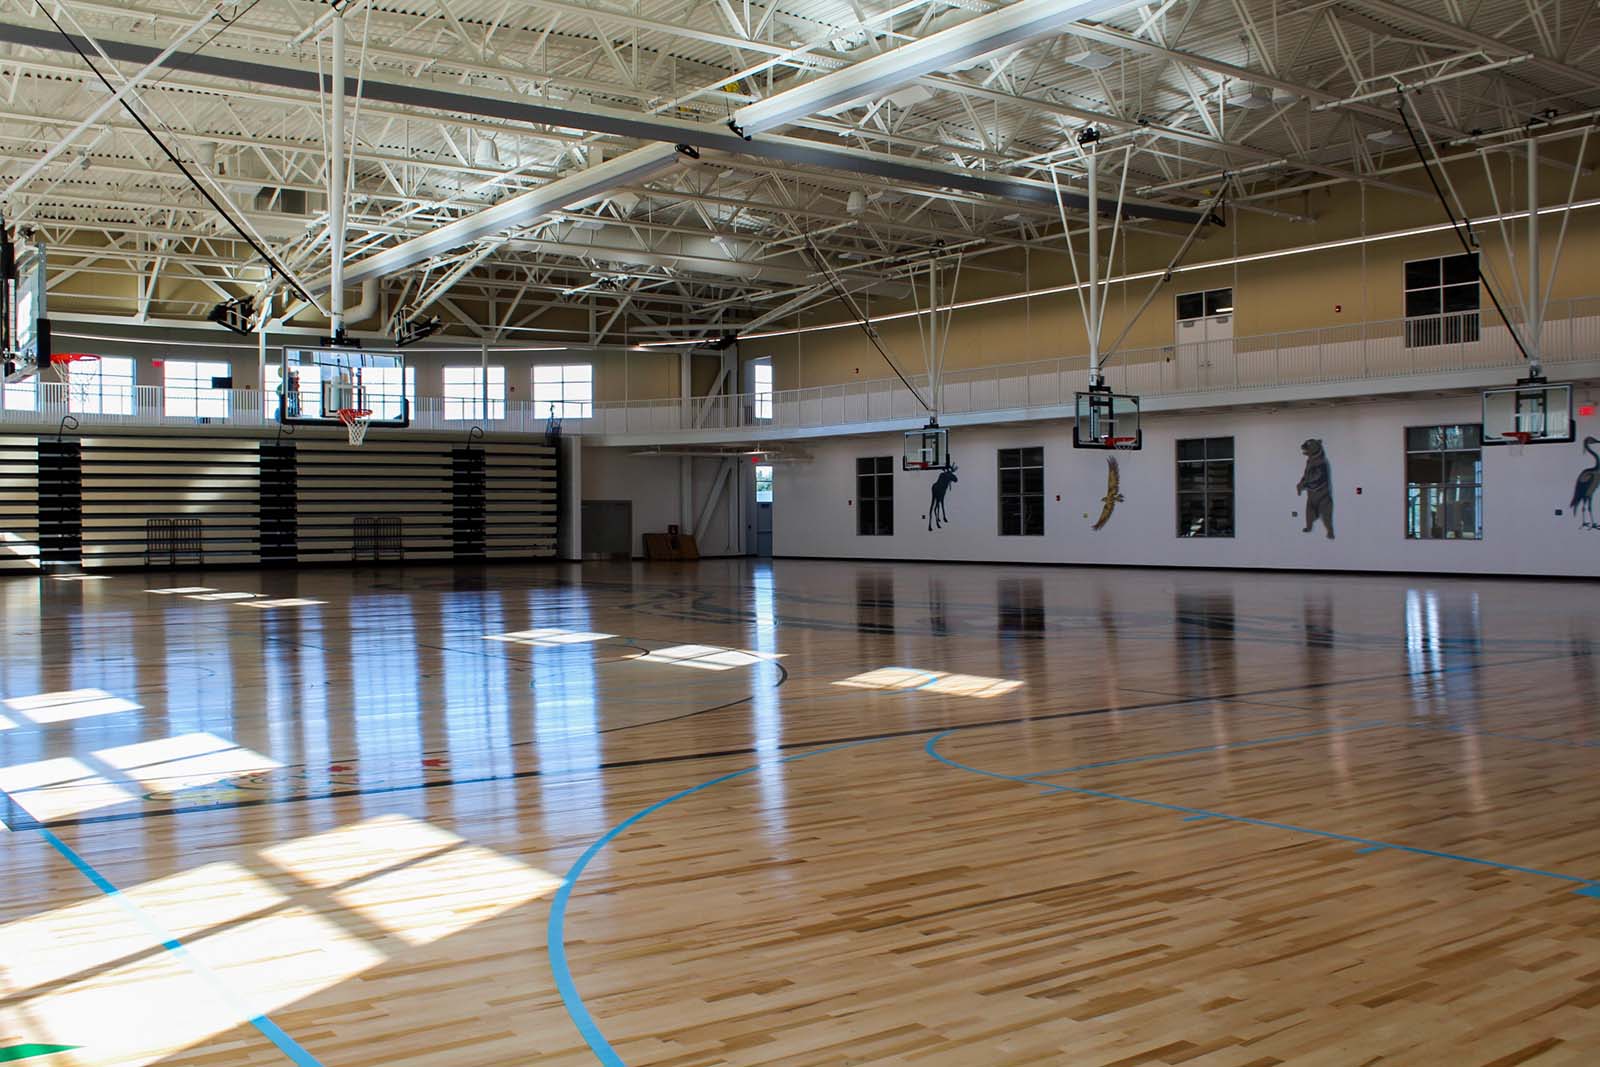 two NCAA regulation-size basketball courts that can be divided into smaller practice areas